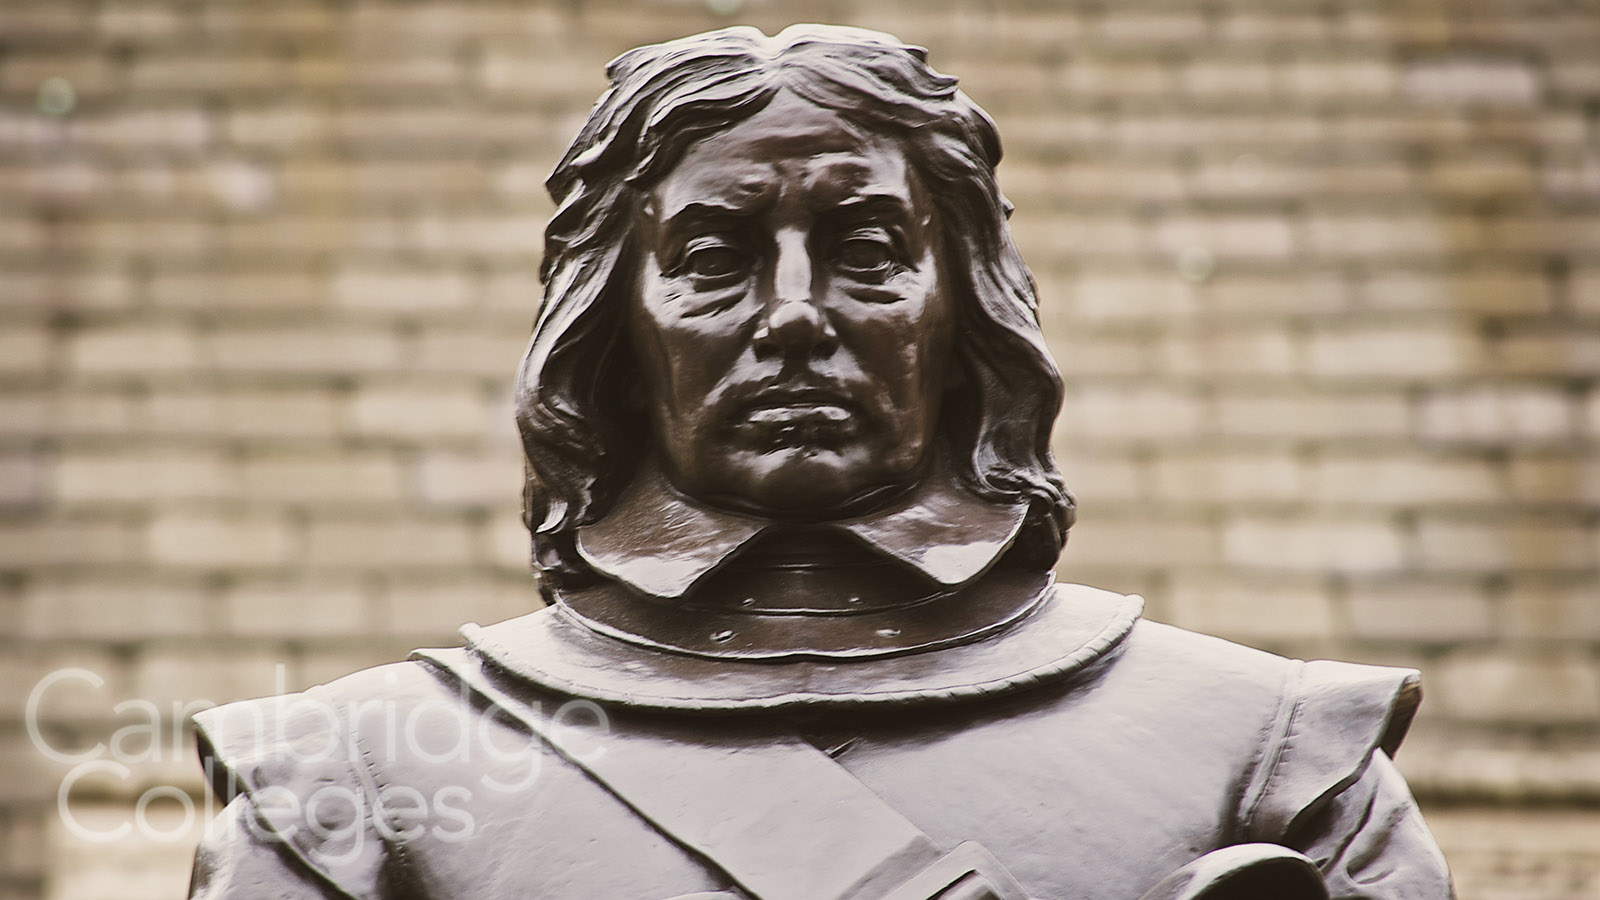 Oliver Cromwell statue By Steve Punter [CC BY-SA 2.0 (https://creativecommons.org/licenses/by-sa/2.0)], via Wikimedia Commons